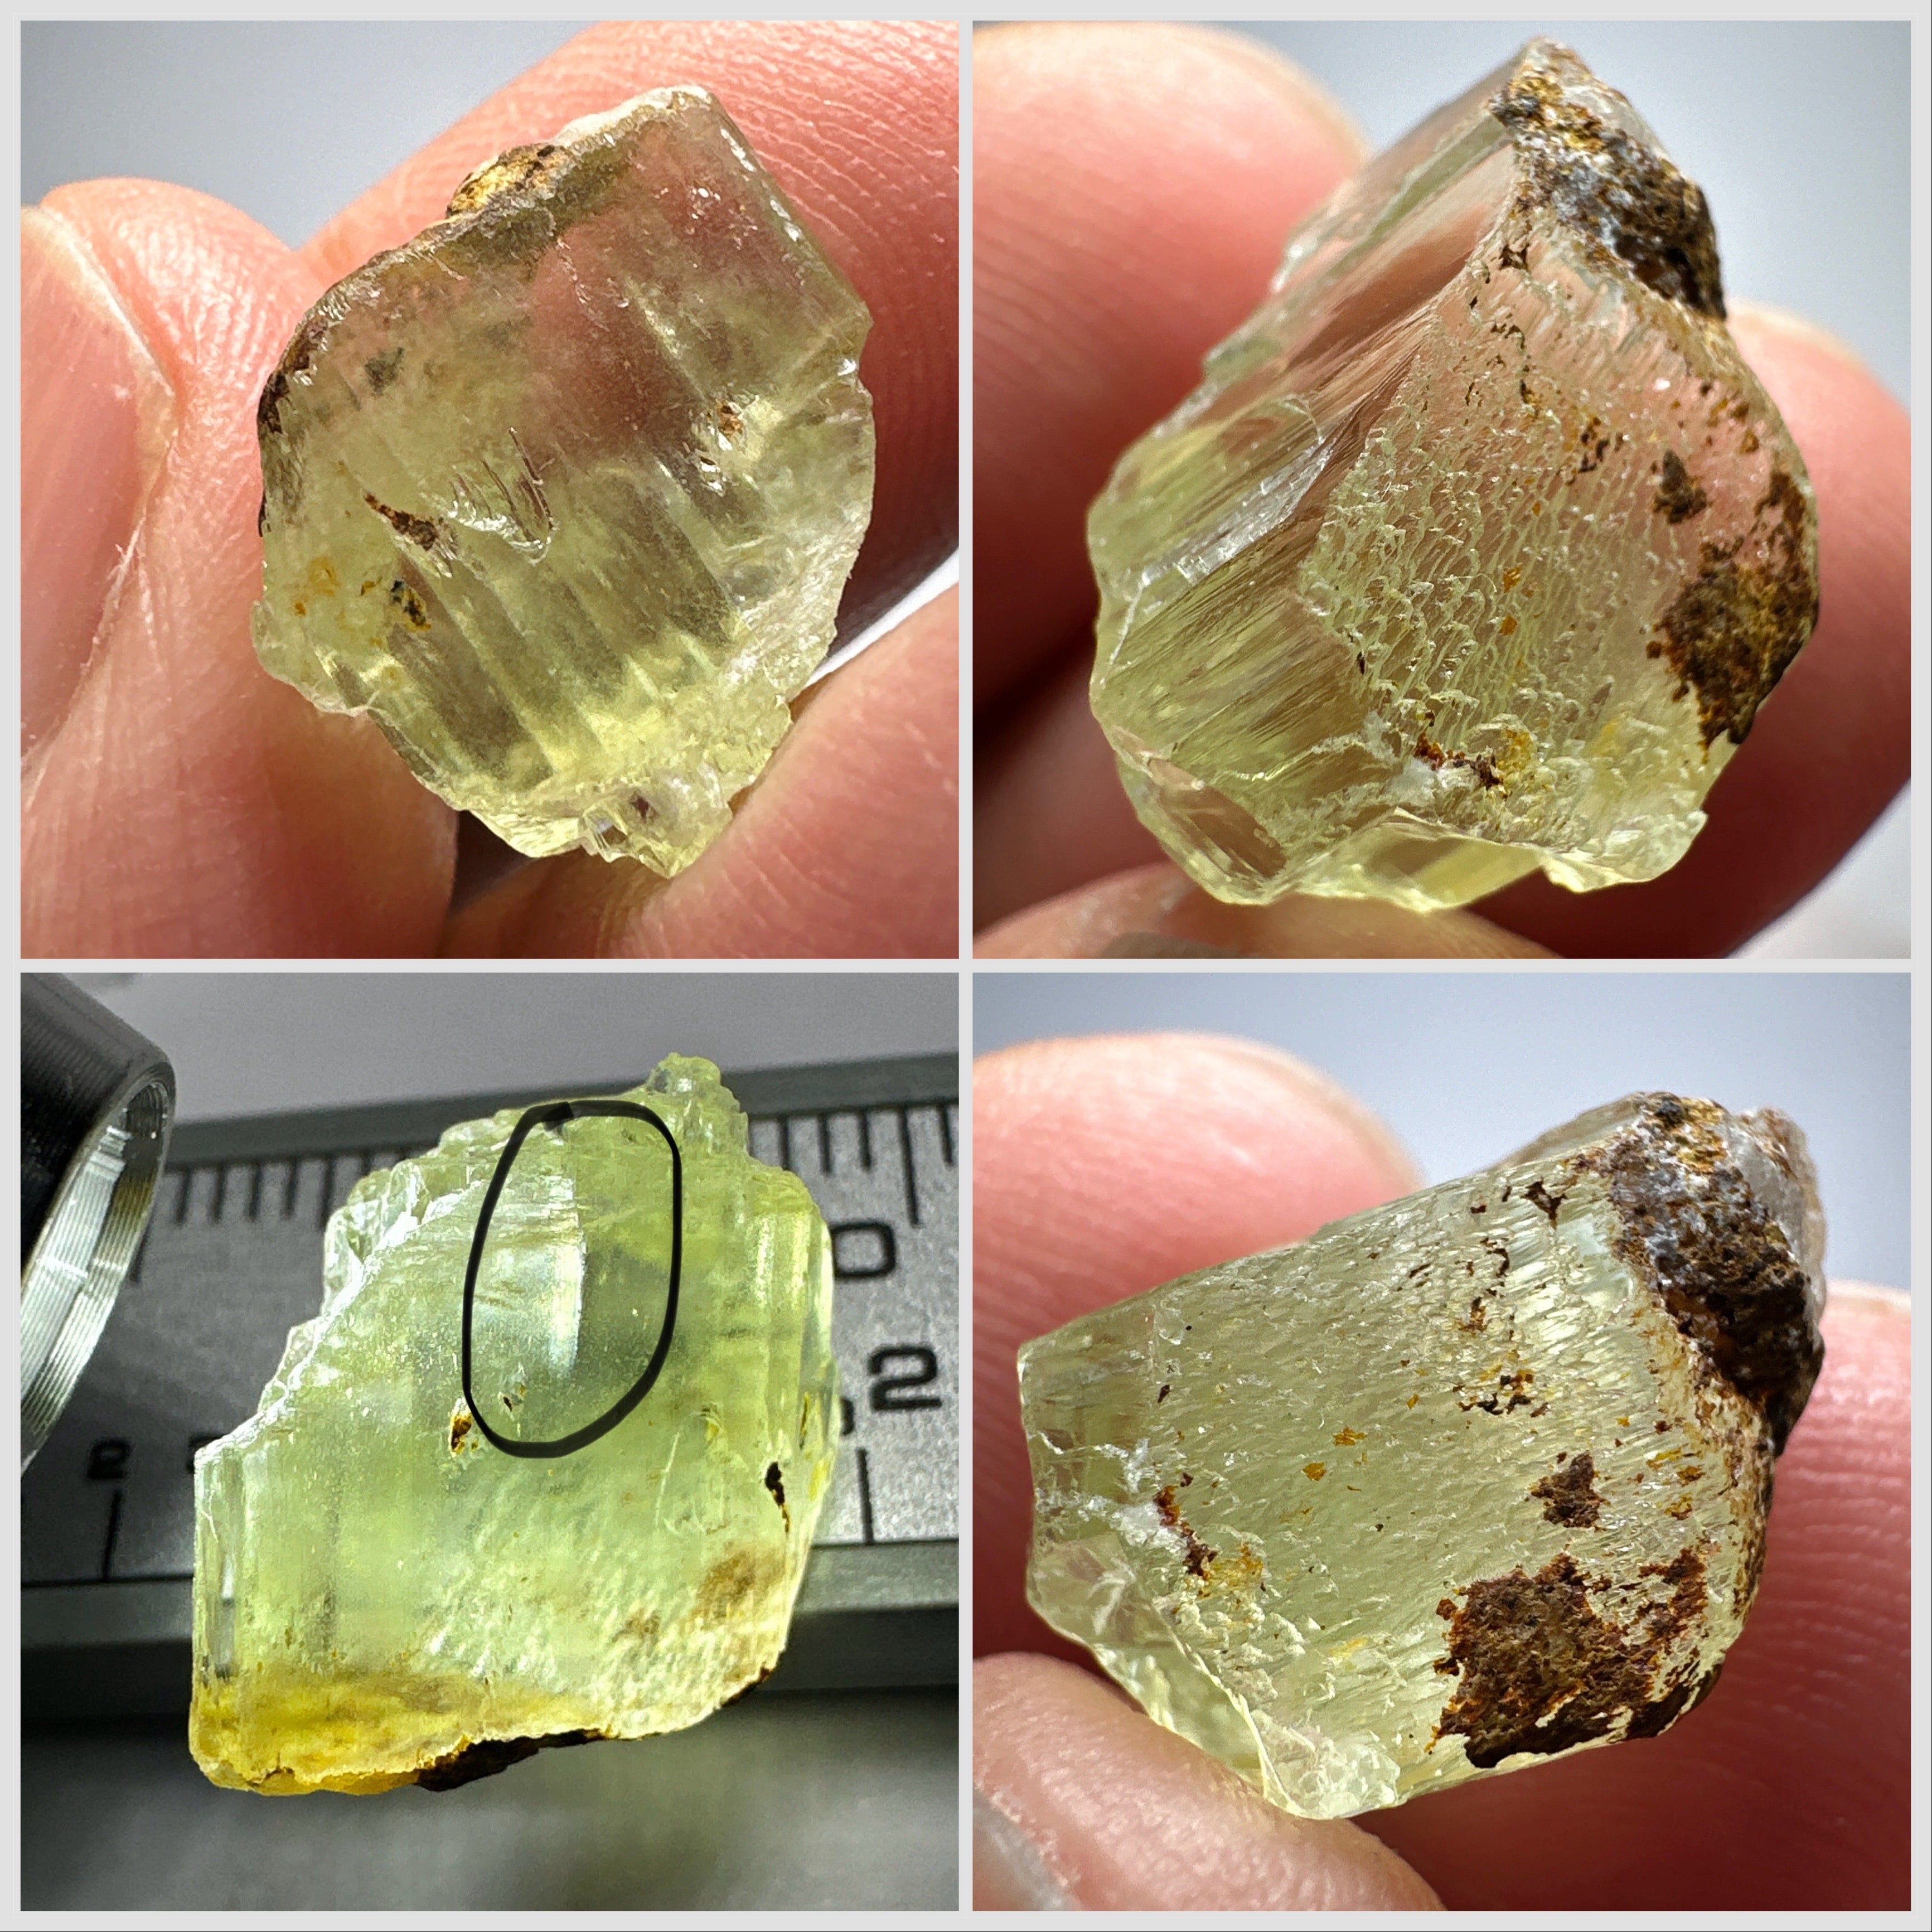 13.66ct Tremolite Crystal, Merelani, Tanzania, Untreated Unheated. Crack inside, the rest is vvs-if, see pic. Beautiful soft lime green colour